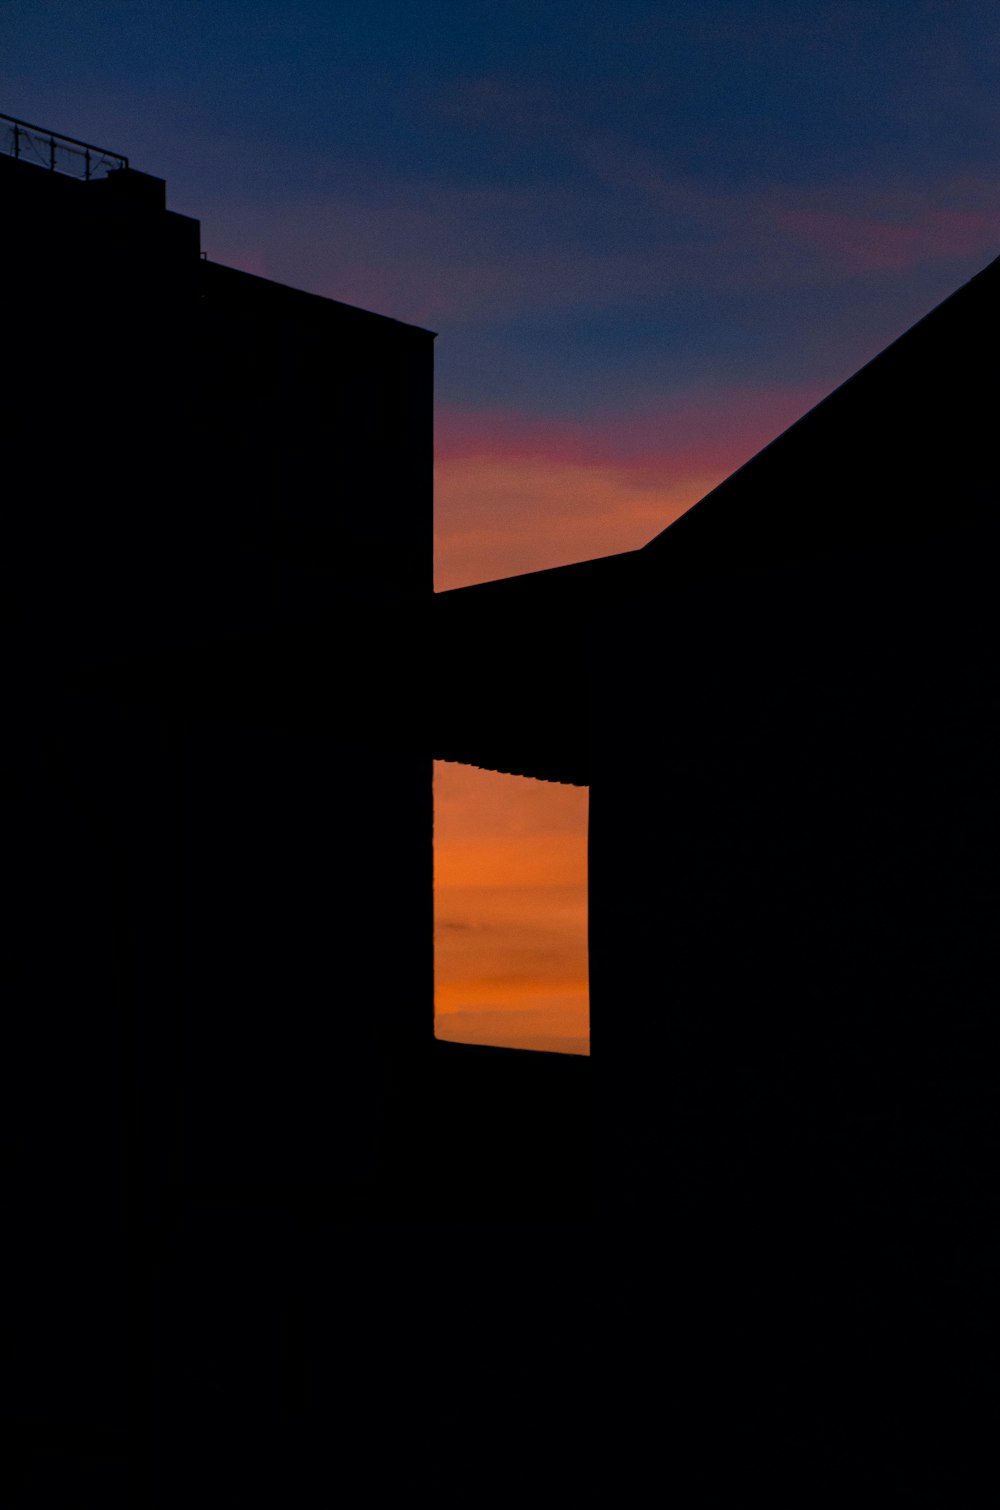 the silhouette of two buildings against a sunset